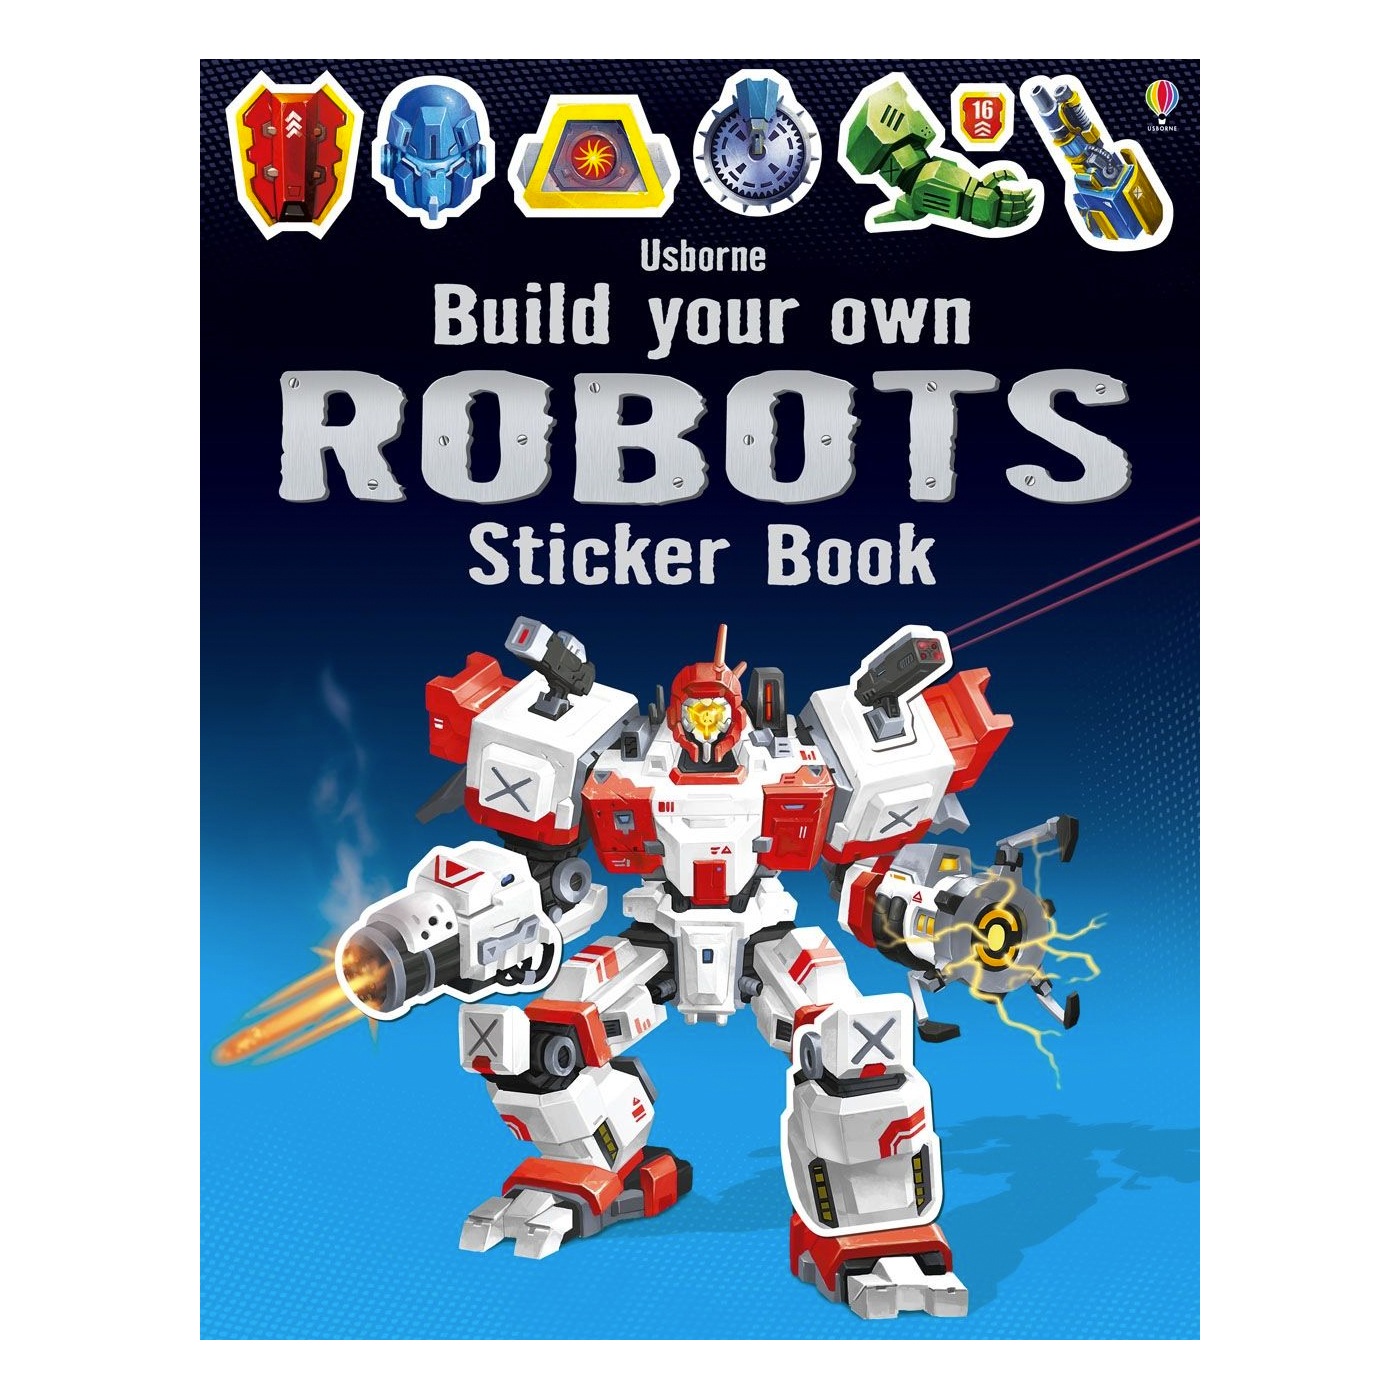  Build Your Own Robots Sticker Book